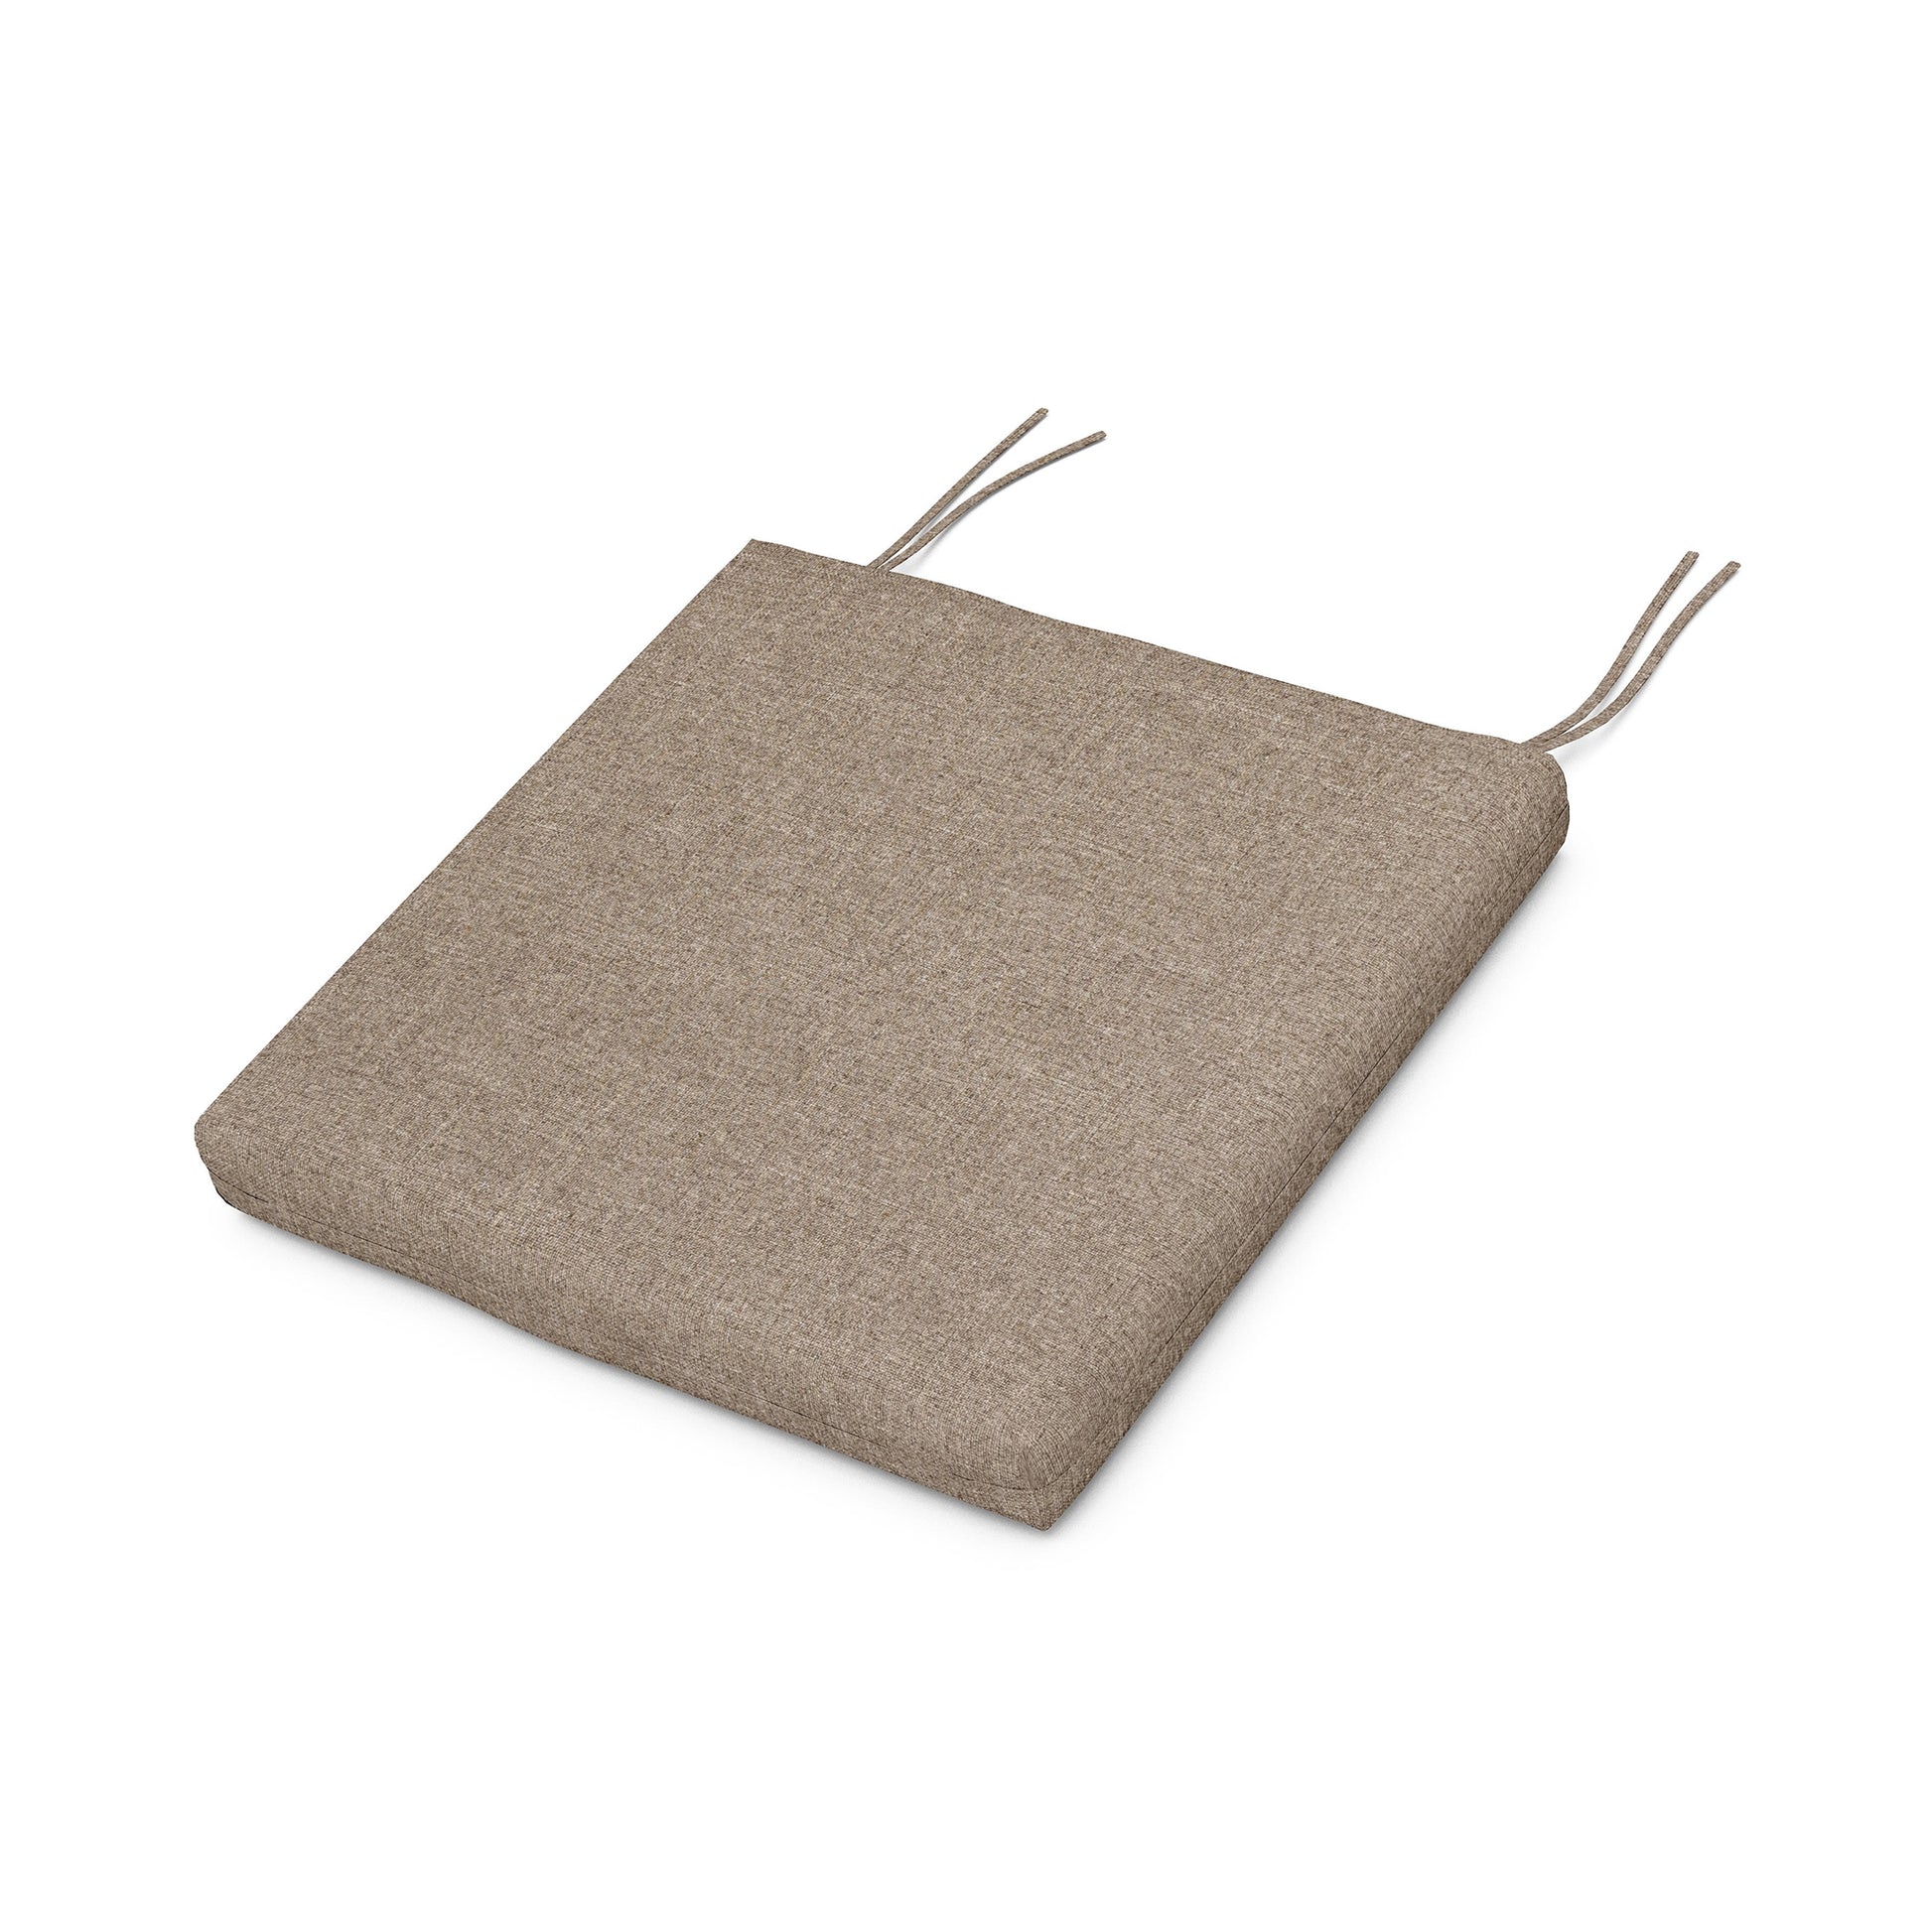 A beige POLYWOOD XPWS0006 - Seat Cushion on a white background, offering comfort and durability with its weather-resistant upholstery fabric.